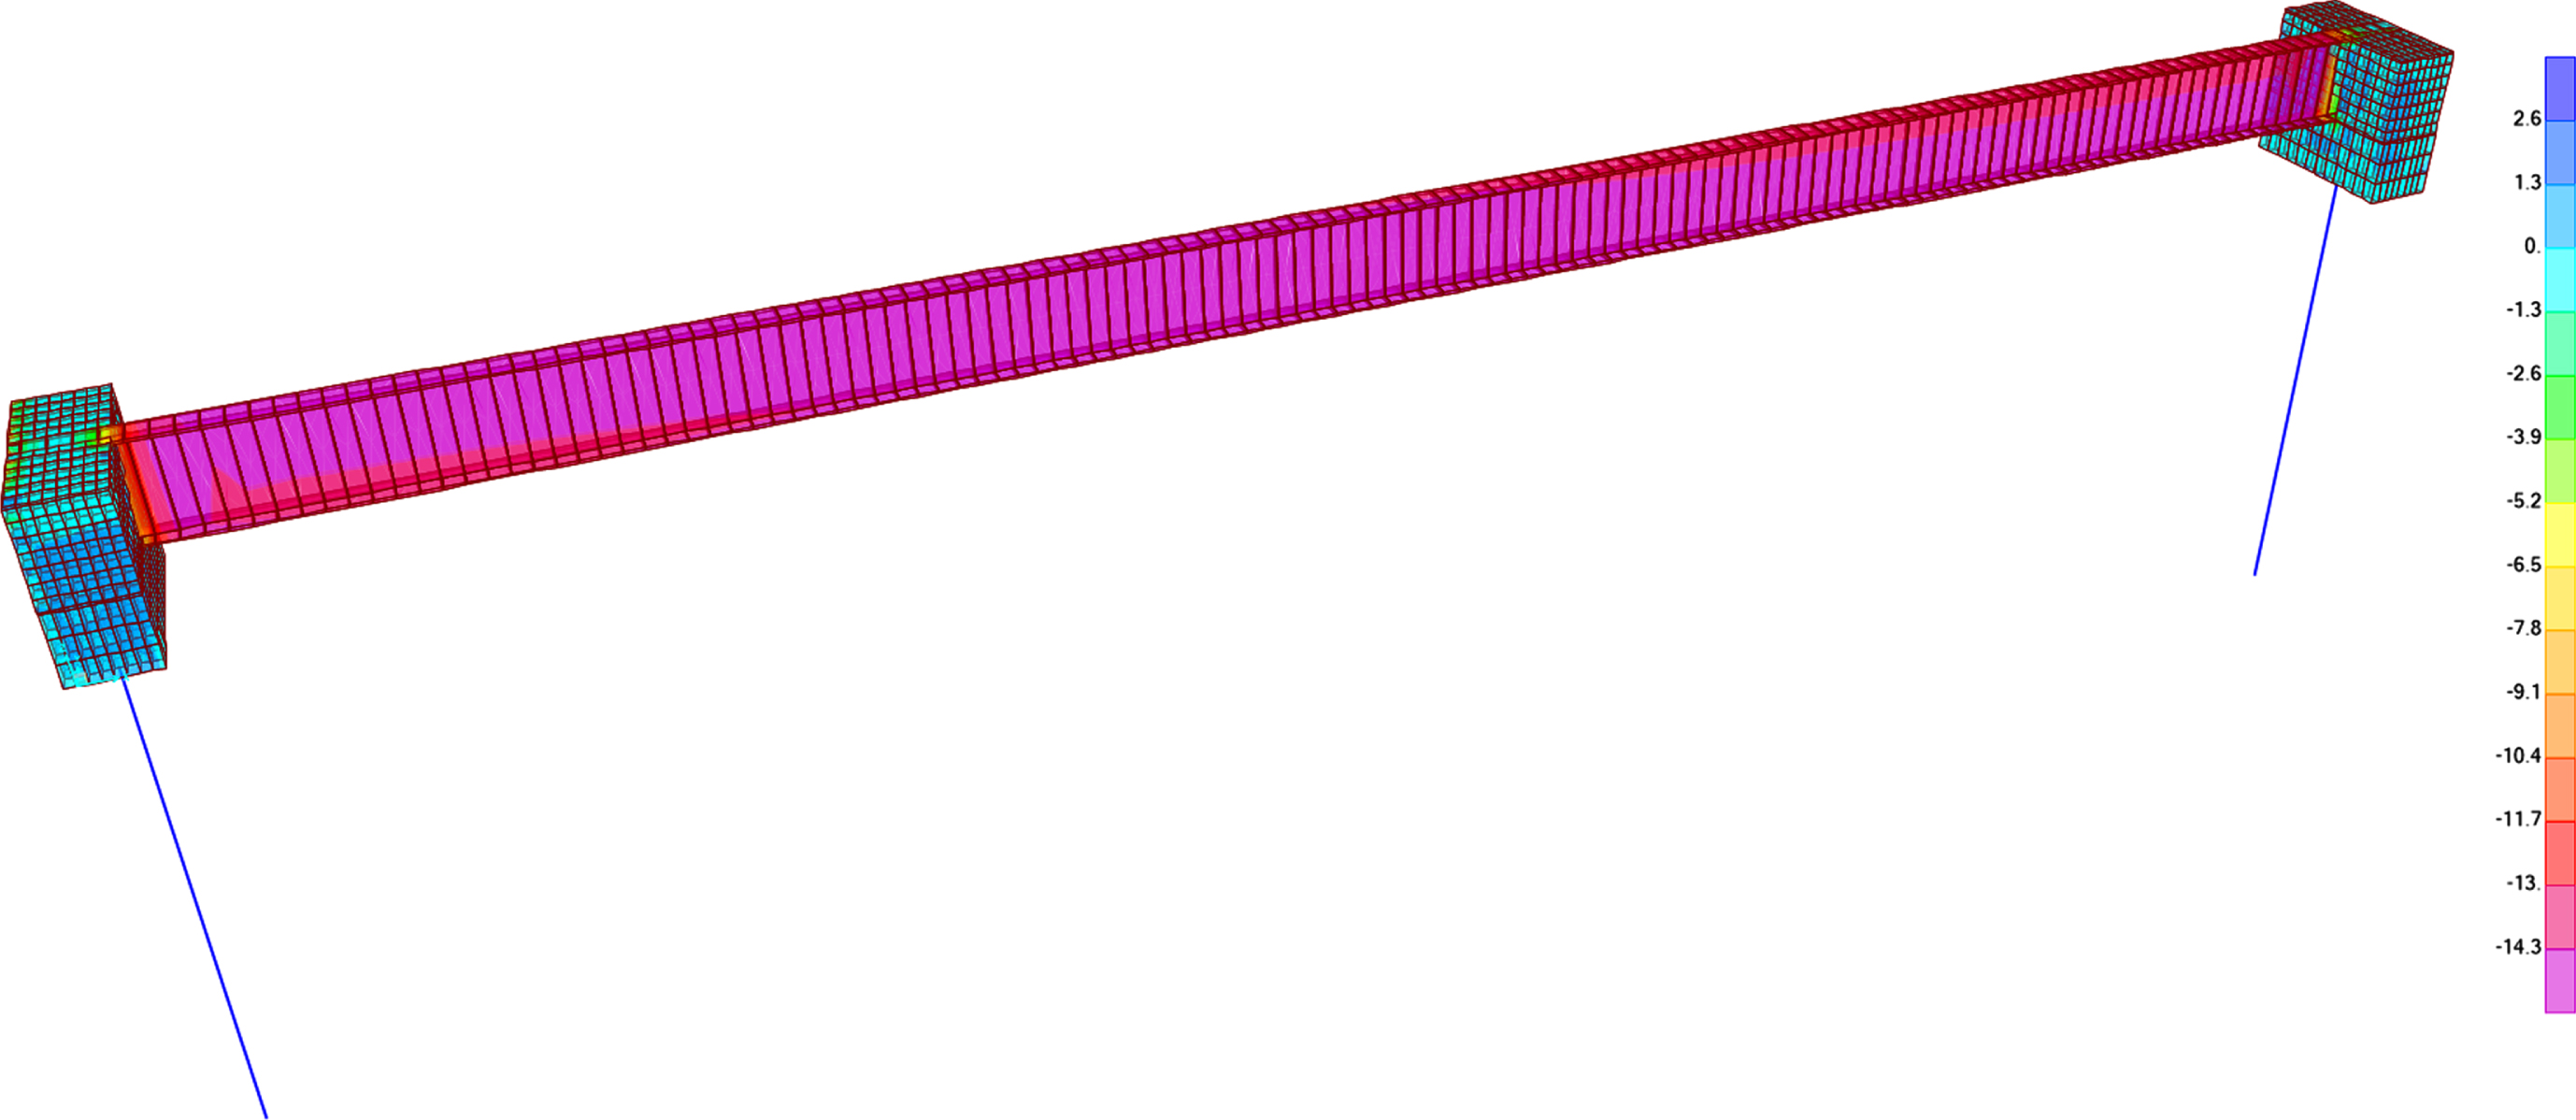 Axial stress distribution in a typical interior girder with stiff backfill.